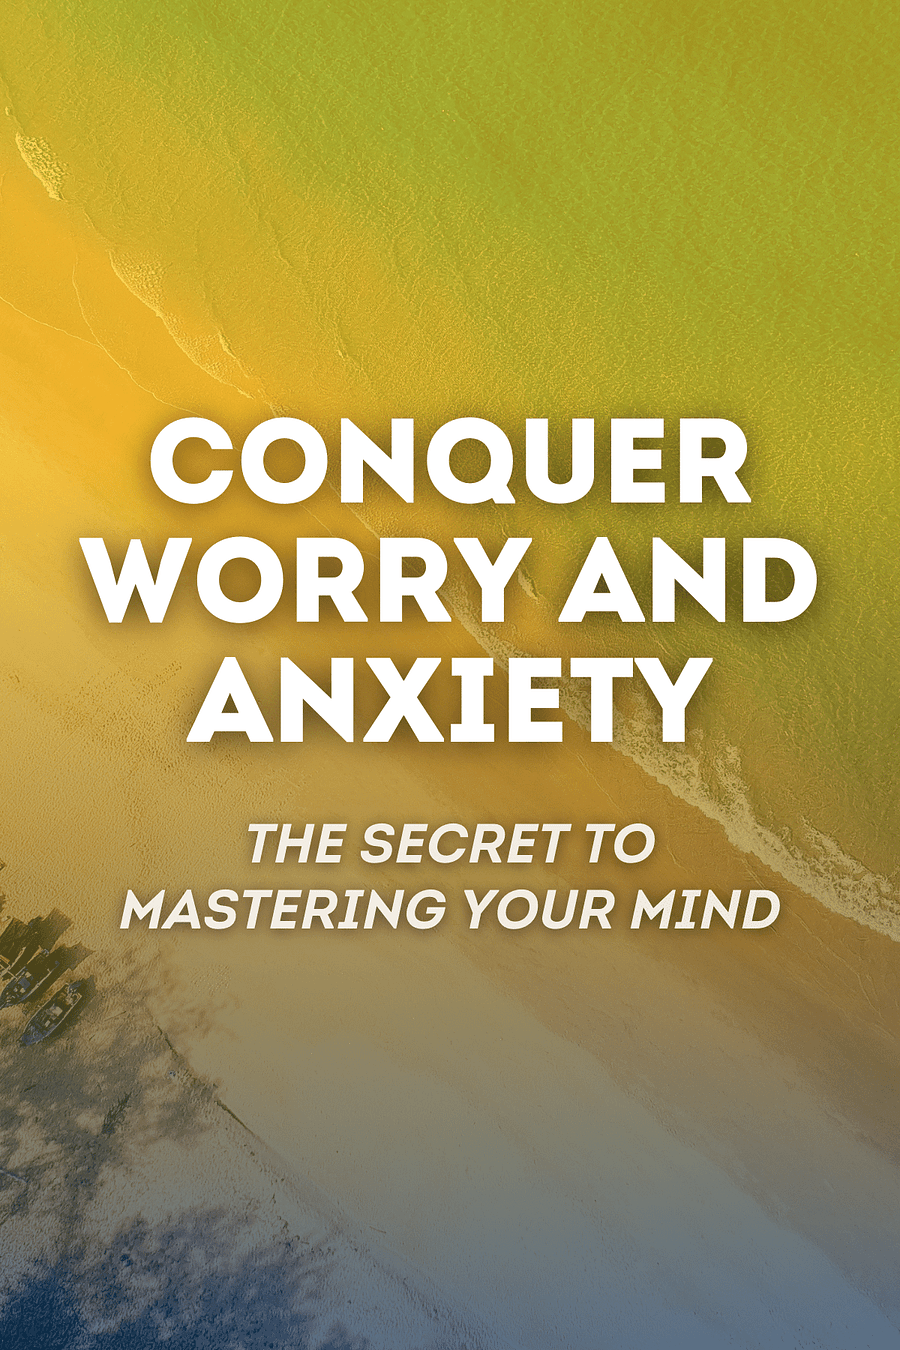 Conquer Worry and Anxiety by Daniel G. Amen - Book Summary